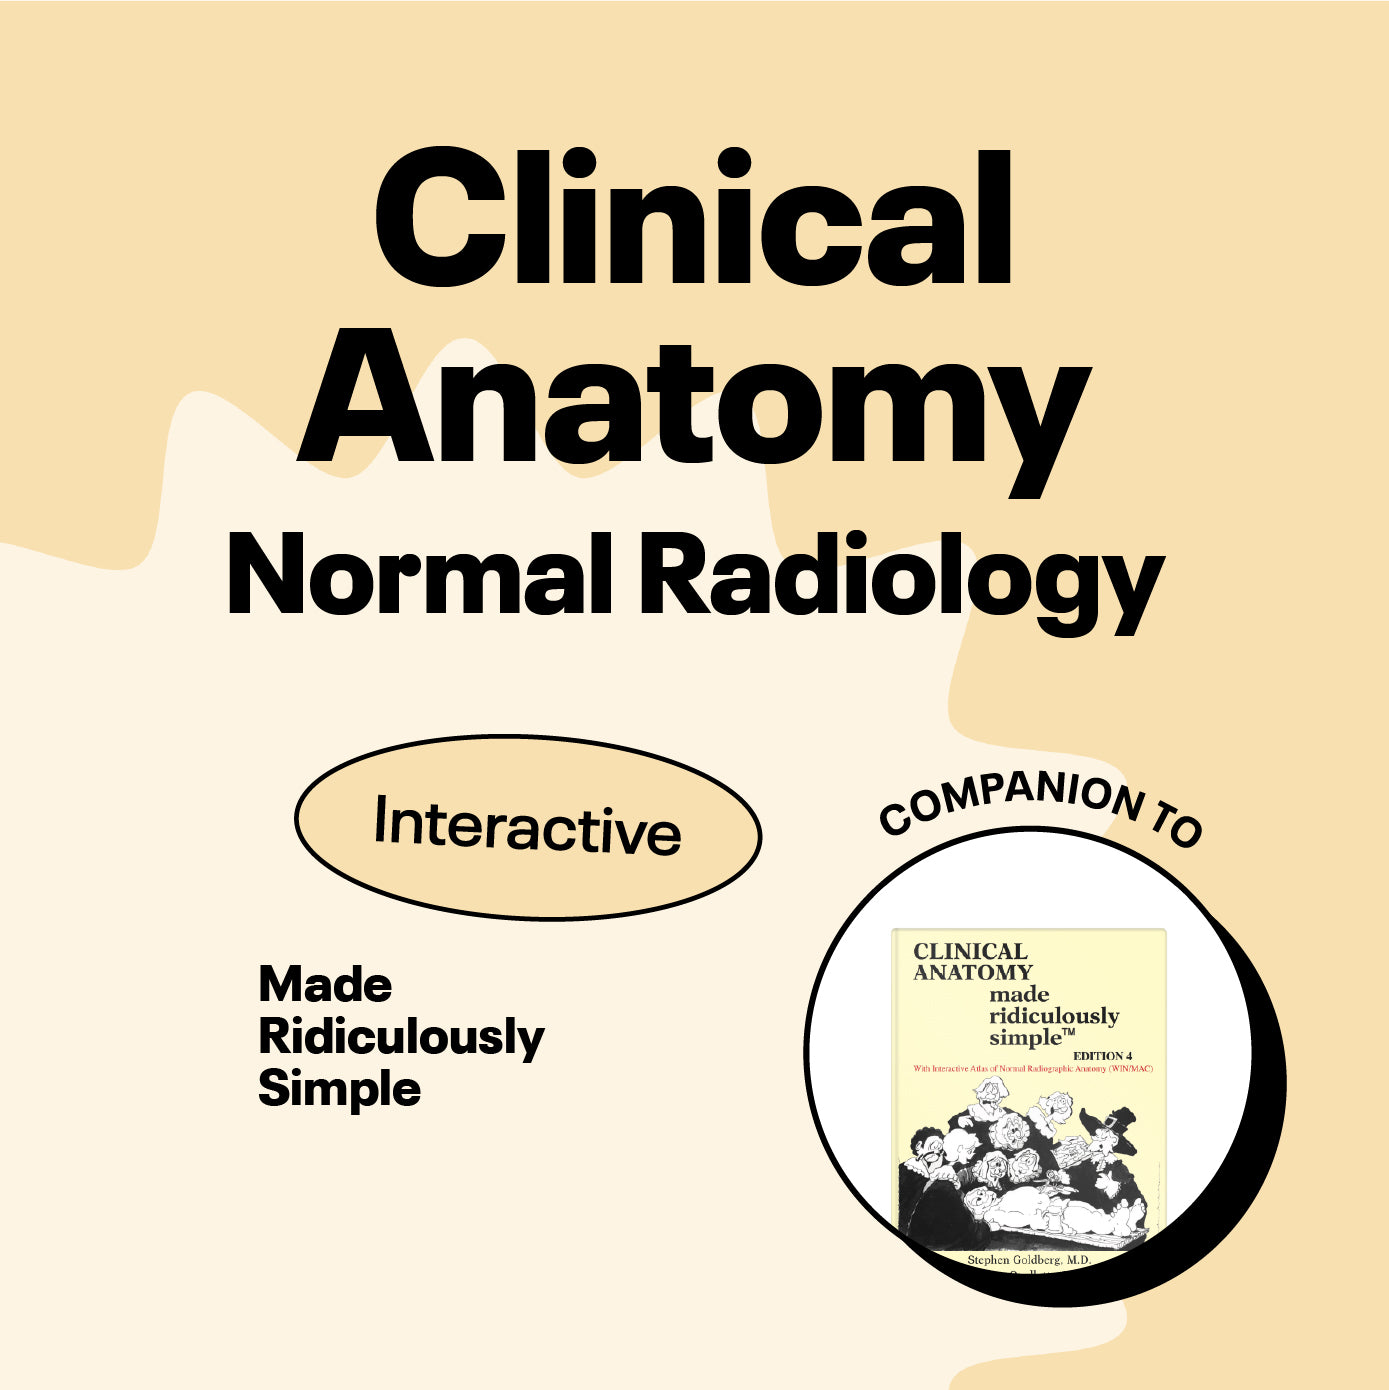 Clinical Anatomy Made Ridiculously Simple Interactive Atlas of Normal Radiology